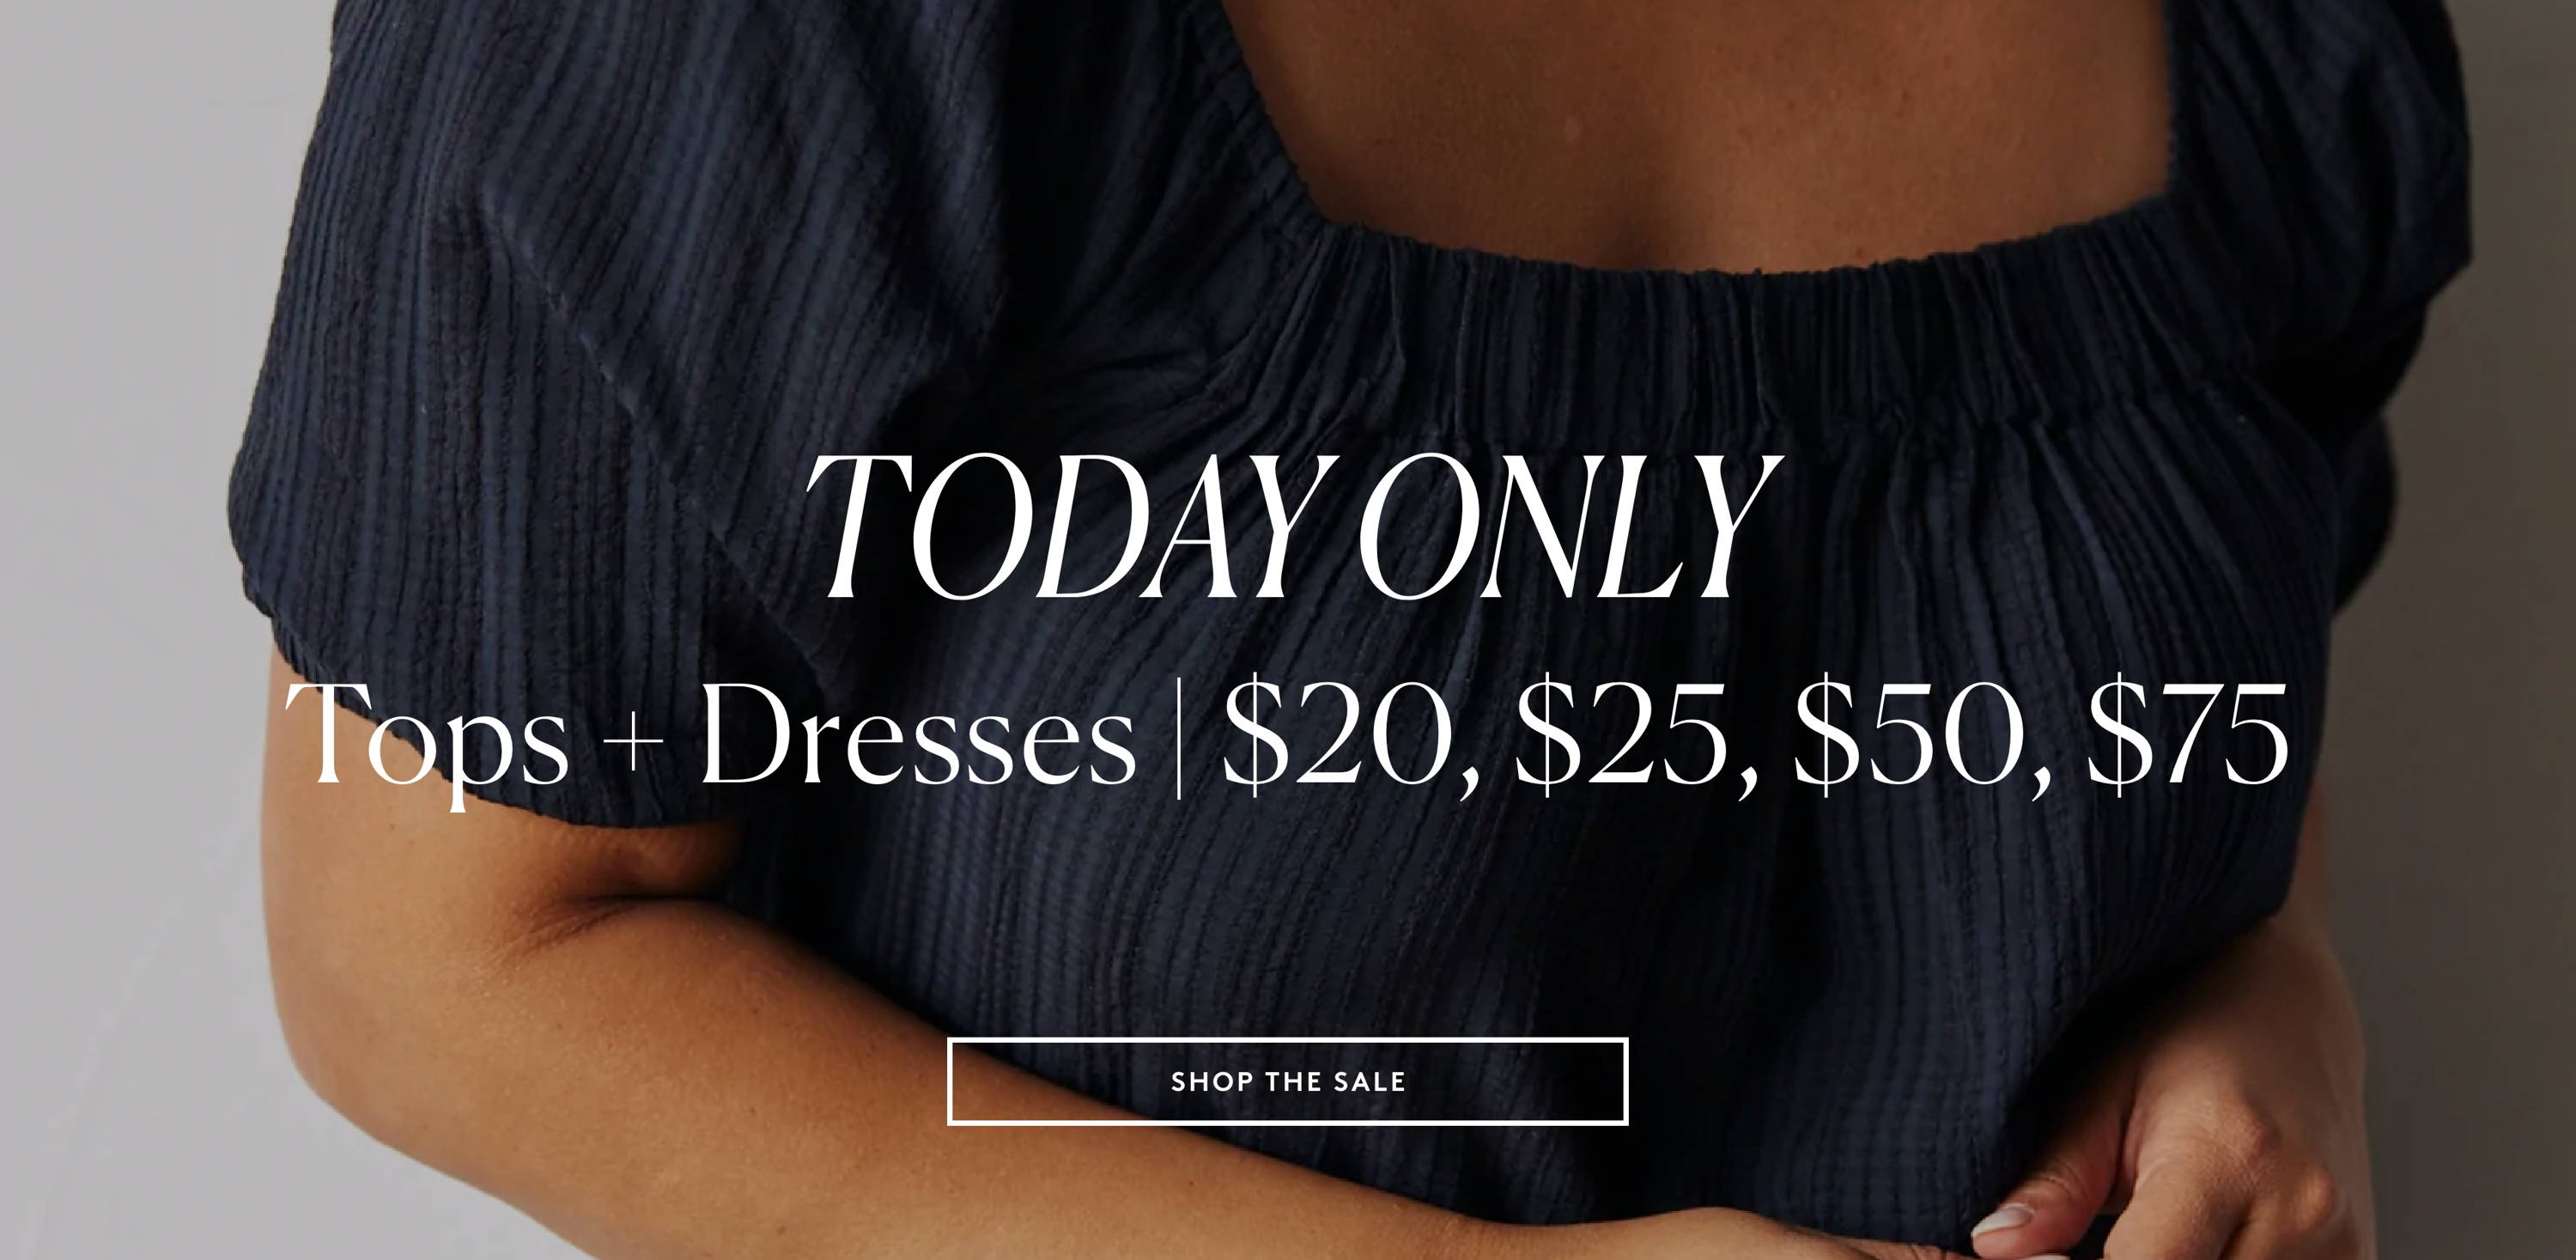 TODAY ONLY! Tops and dresses $20, $25, $50, $75